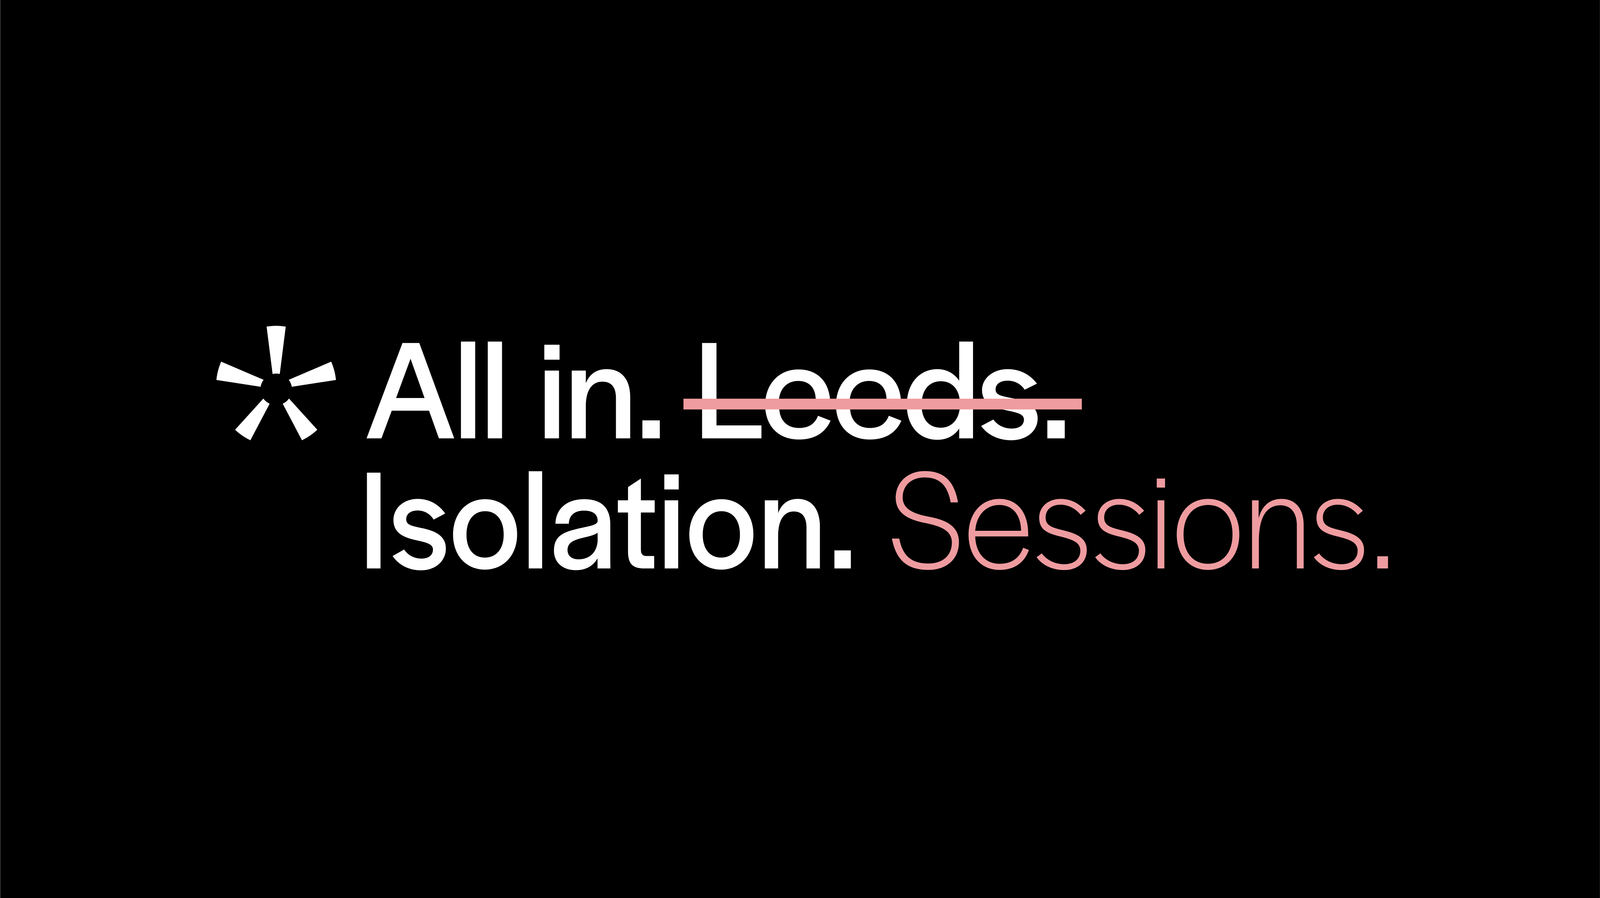 All in. Leeds. launches live webinars during lockdown